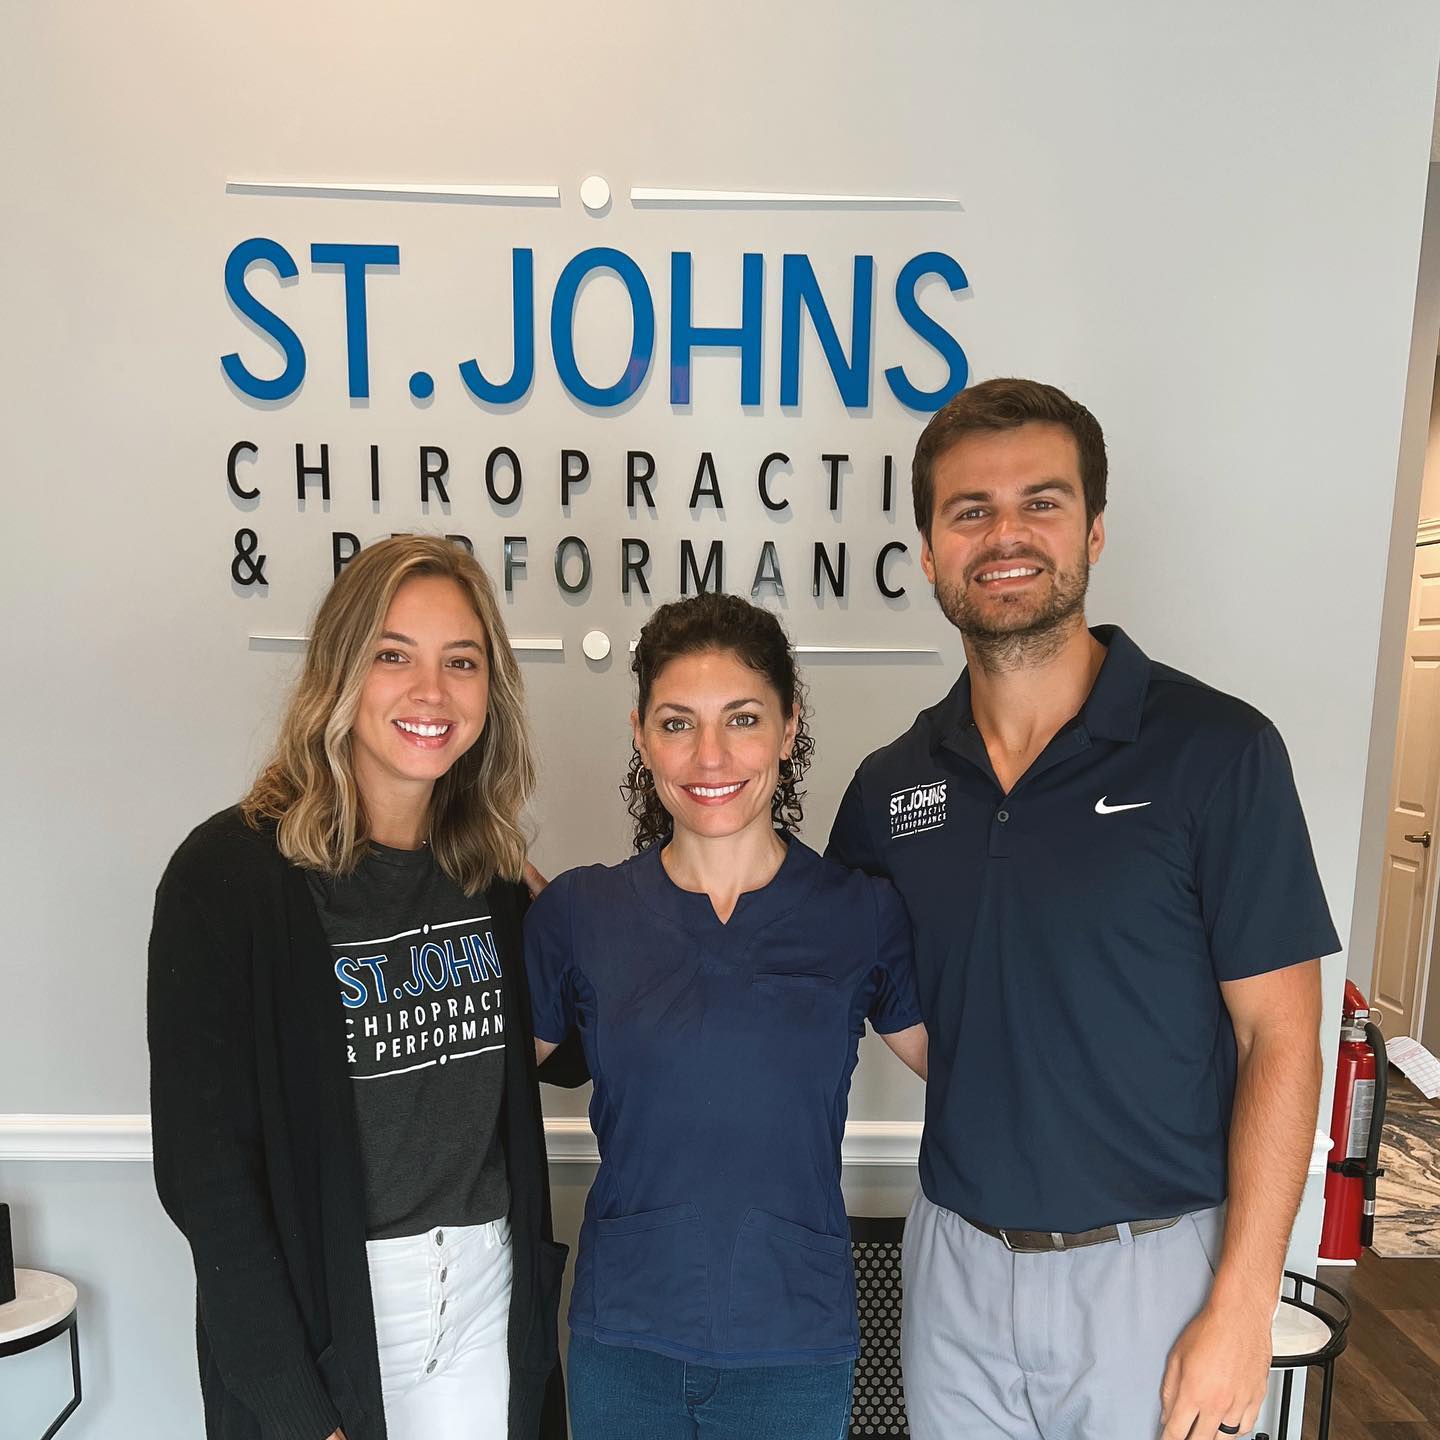 We are so excited to have Leah with @postureworksjax at our office working alongside us! She is a Licensed Massage Therapist and a Certified Personal Trainer. She does an amazing job, provides excellent care for her clients, and overall is a joy to be around! It has been awesome having her here with us!

Leah is accepting new clients for both personal training and massage therapy! Come and see her! You’ll be glad you did ☺️💪🏽👏🏽